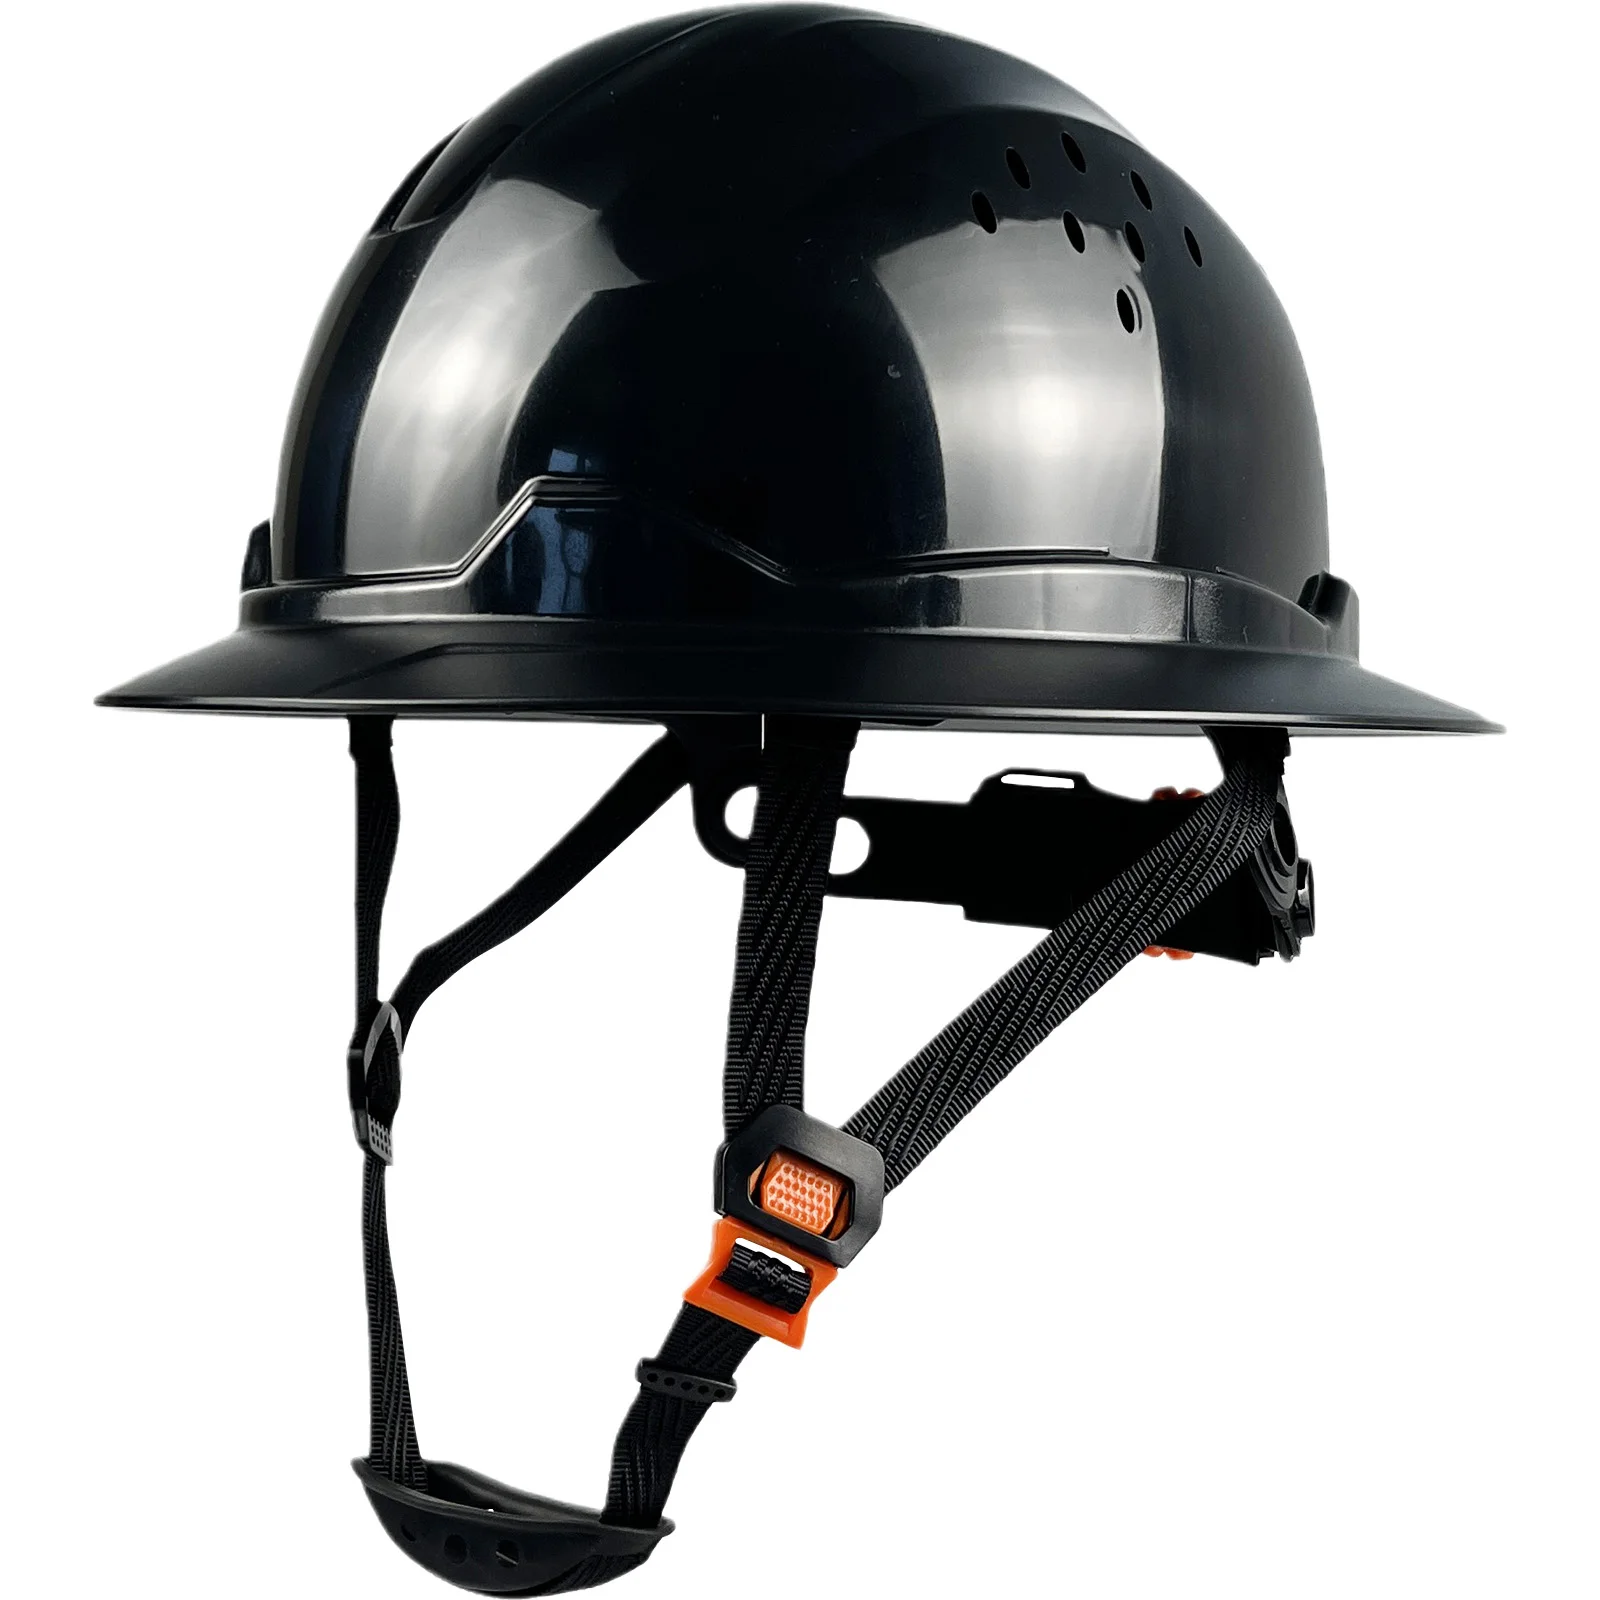 

Full Brim Hard Hat For Engineer Construction Work Cap For Men ANSI Approved HDPE Safety Helmet with 6 Point Adjustable